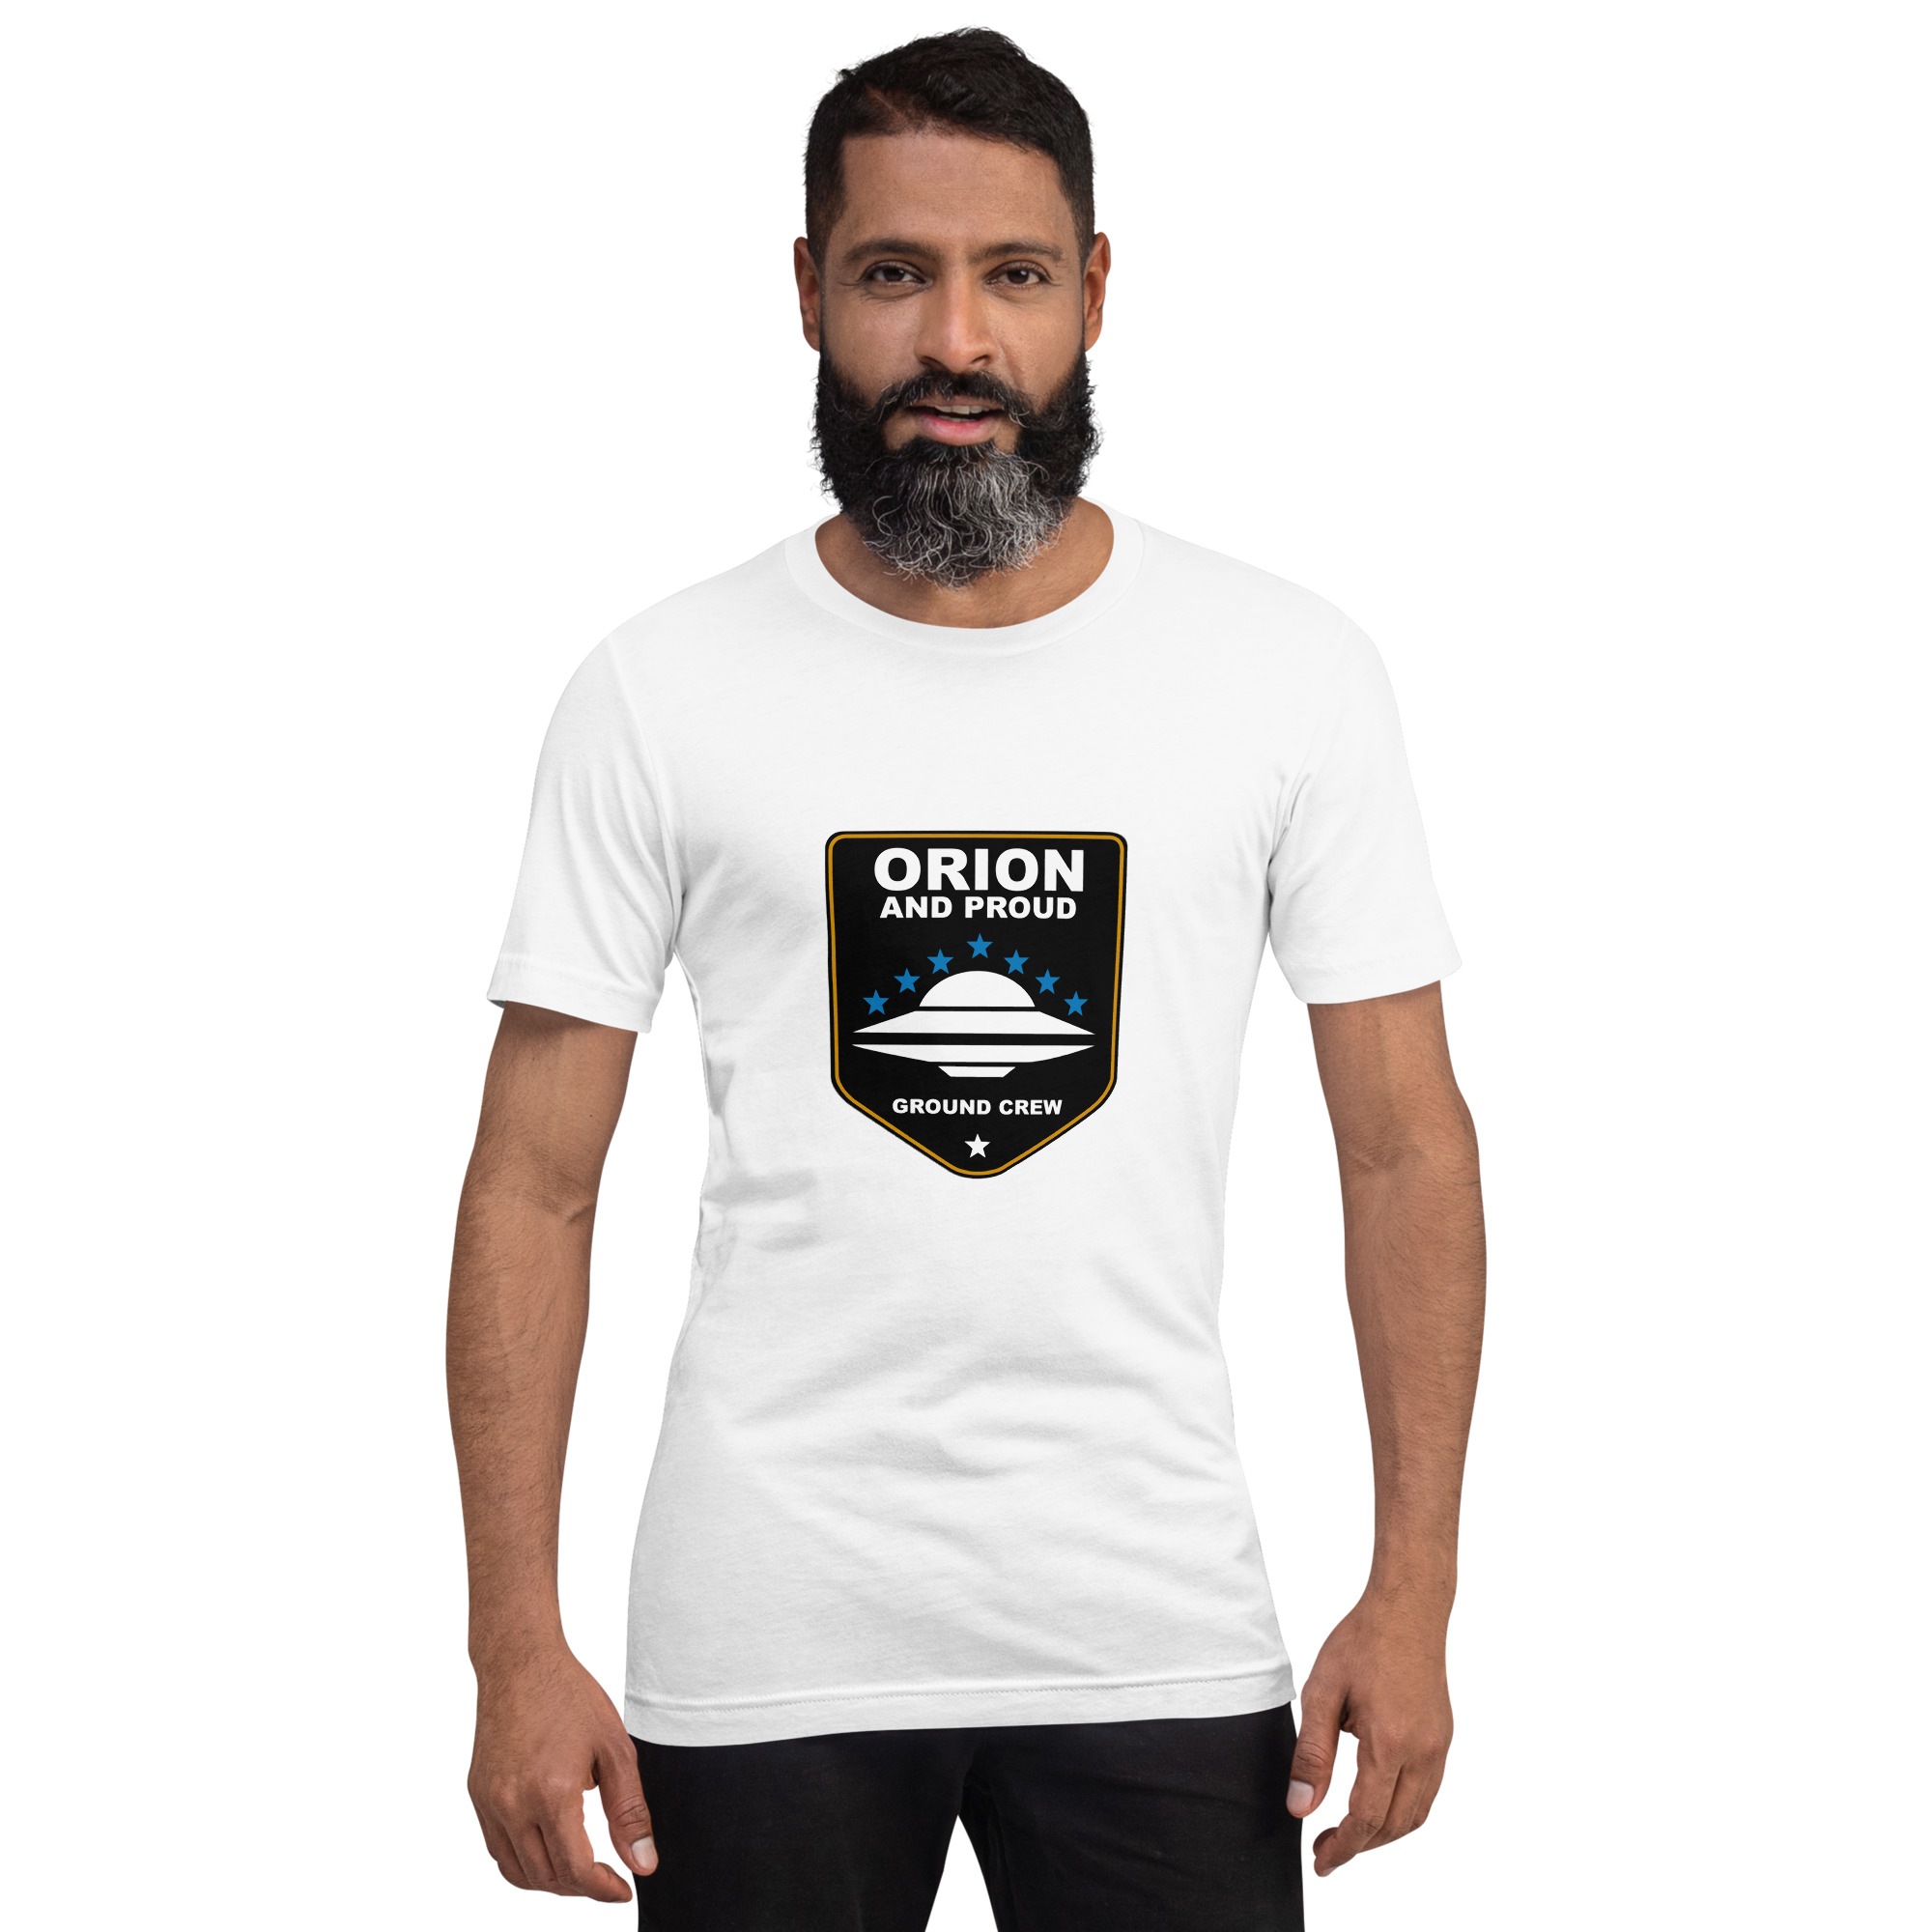 Orion And Proud Tshirt